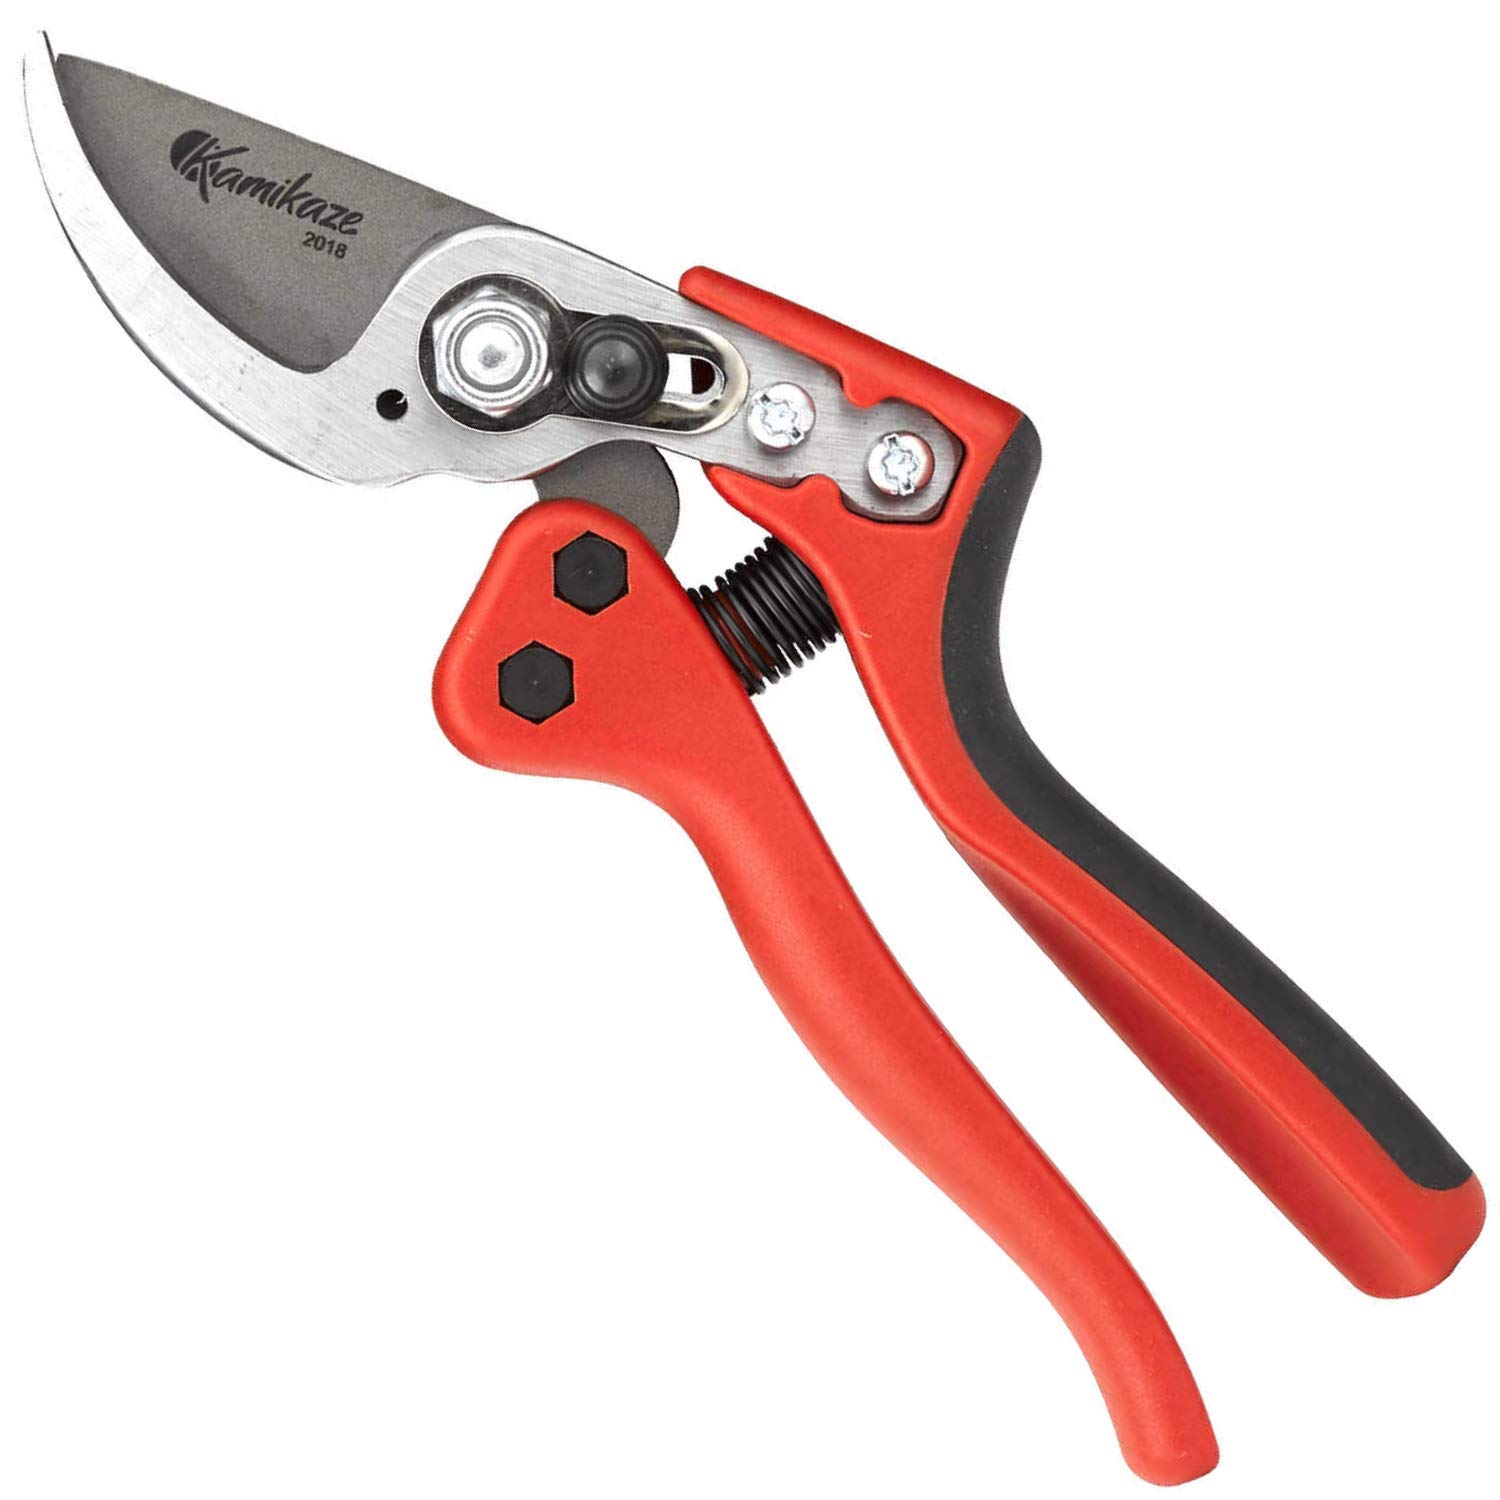 EZ Kut Kamikaze Force Bypass Pruning Shears Heavy Duty - Best Pruners for Gardening and Gardening Gifts for Women and Men - Gardening Hand Tools with a since 1988